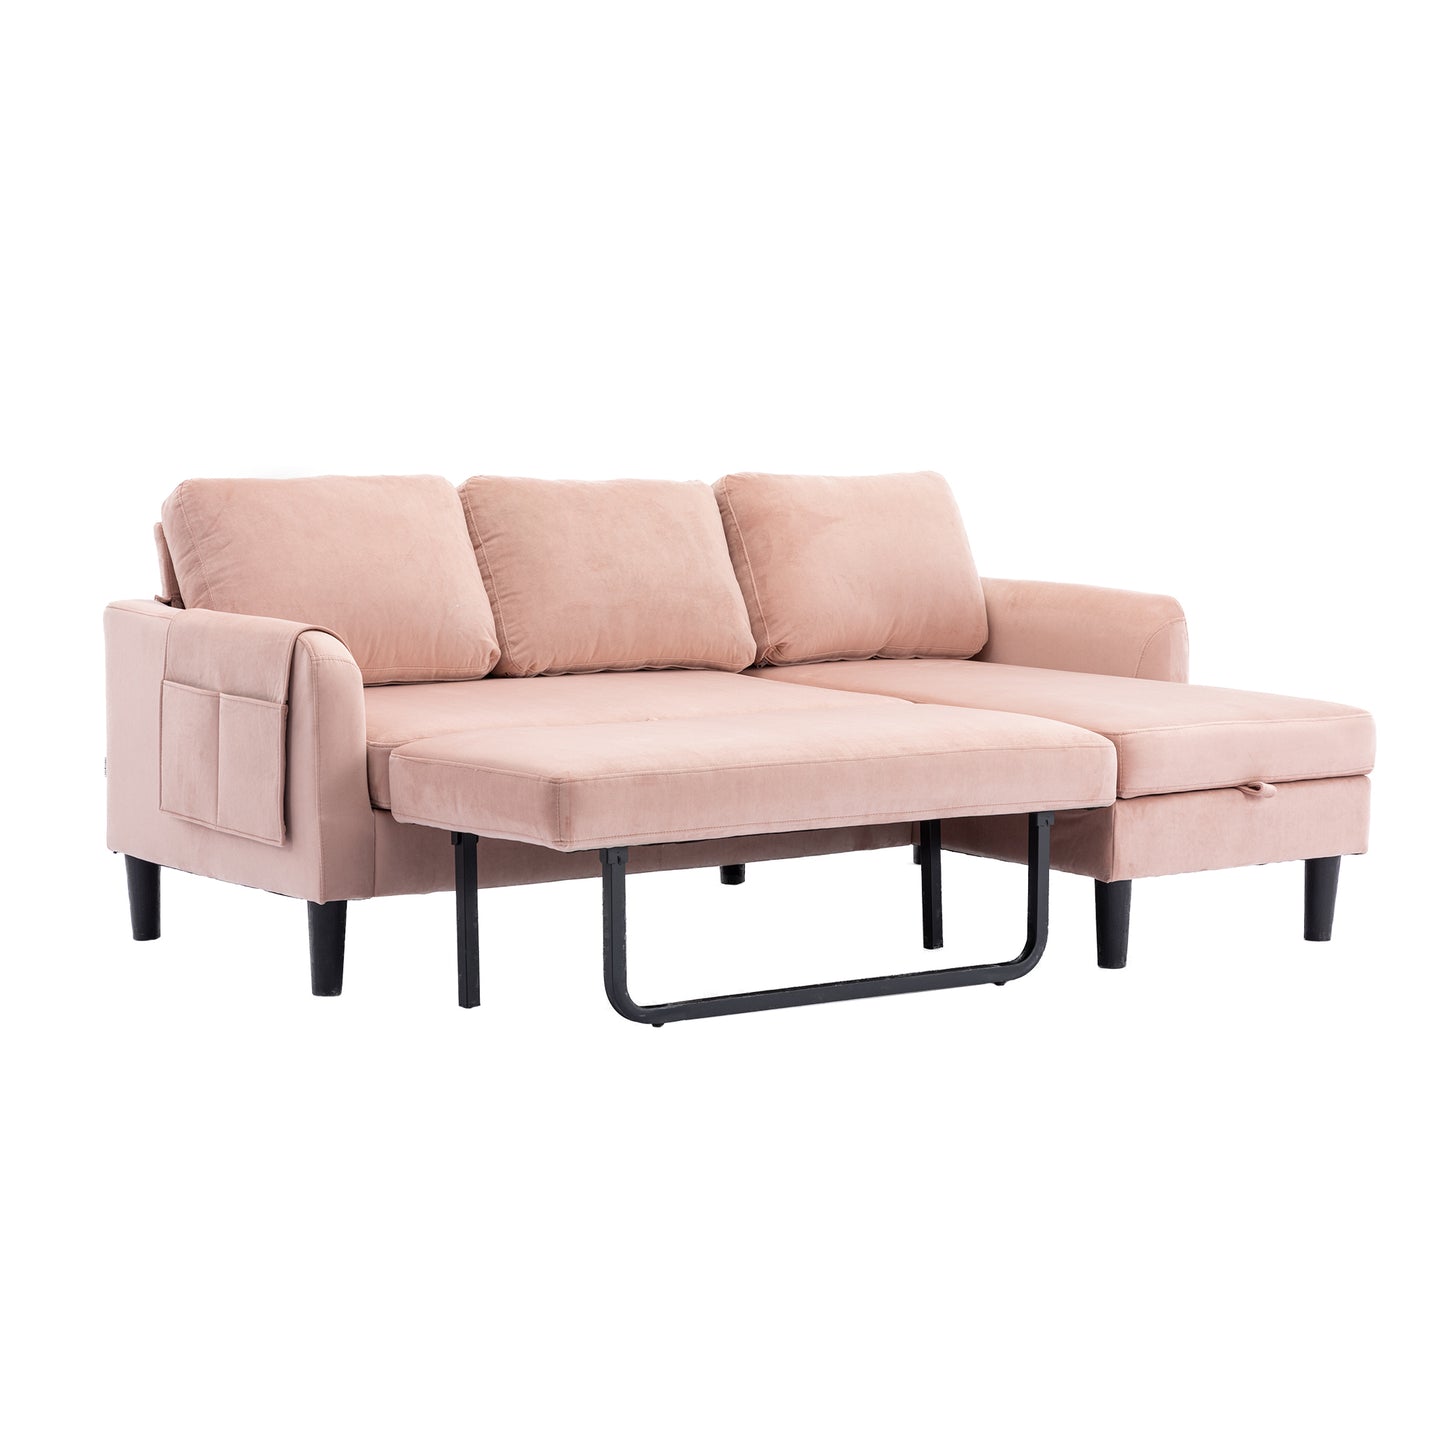 United Reversible Sleeper Sectional, Storage Chaise